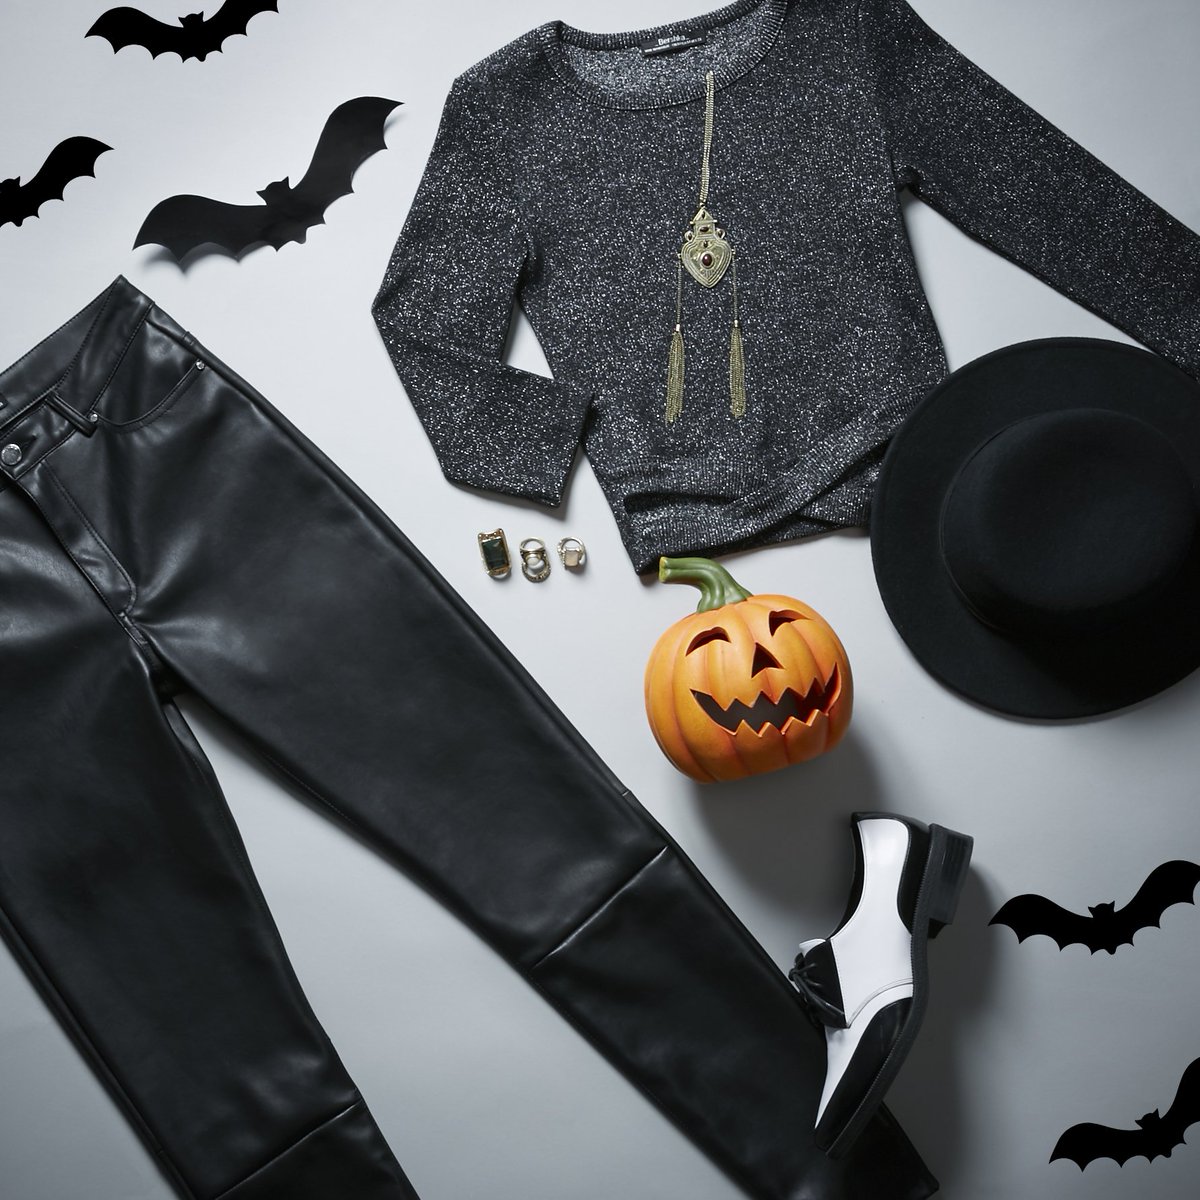 bibliotecario intervalo no usado BERSHKA on Twitter: "Halloween is coming and we are getting ready... Are  you ready too? https://t.co/ZYT9kUPNrO #Halloween https://t.co/MNwVCcezE4"  / Twitter